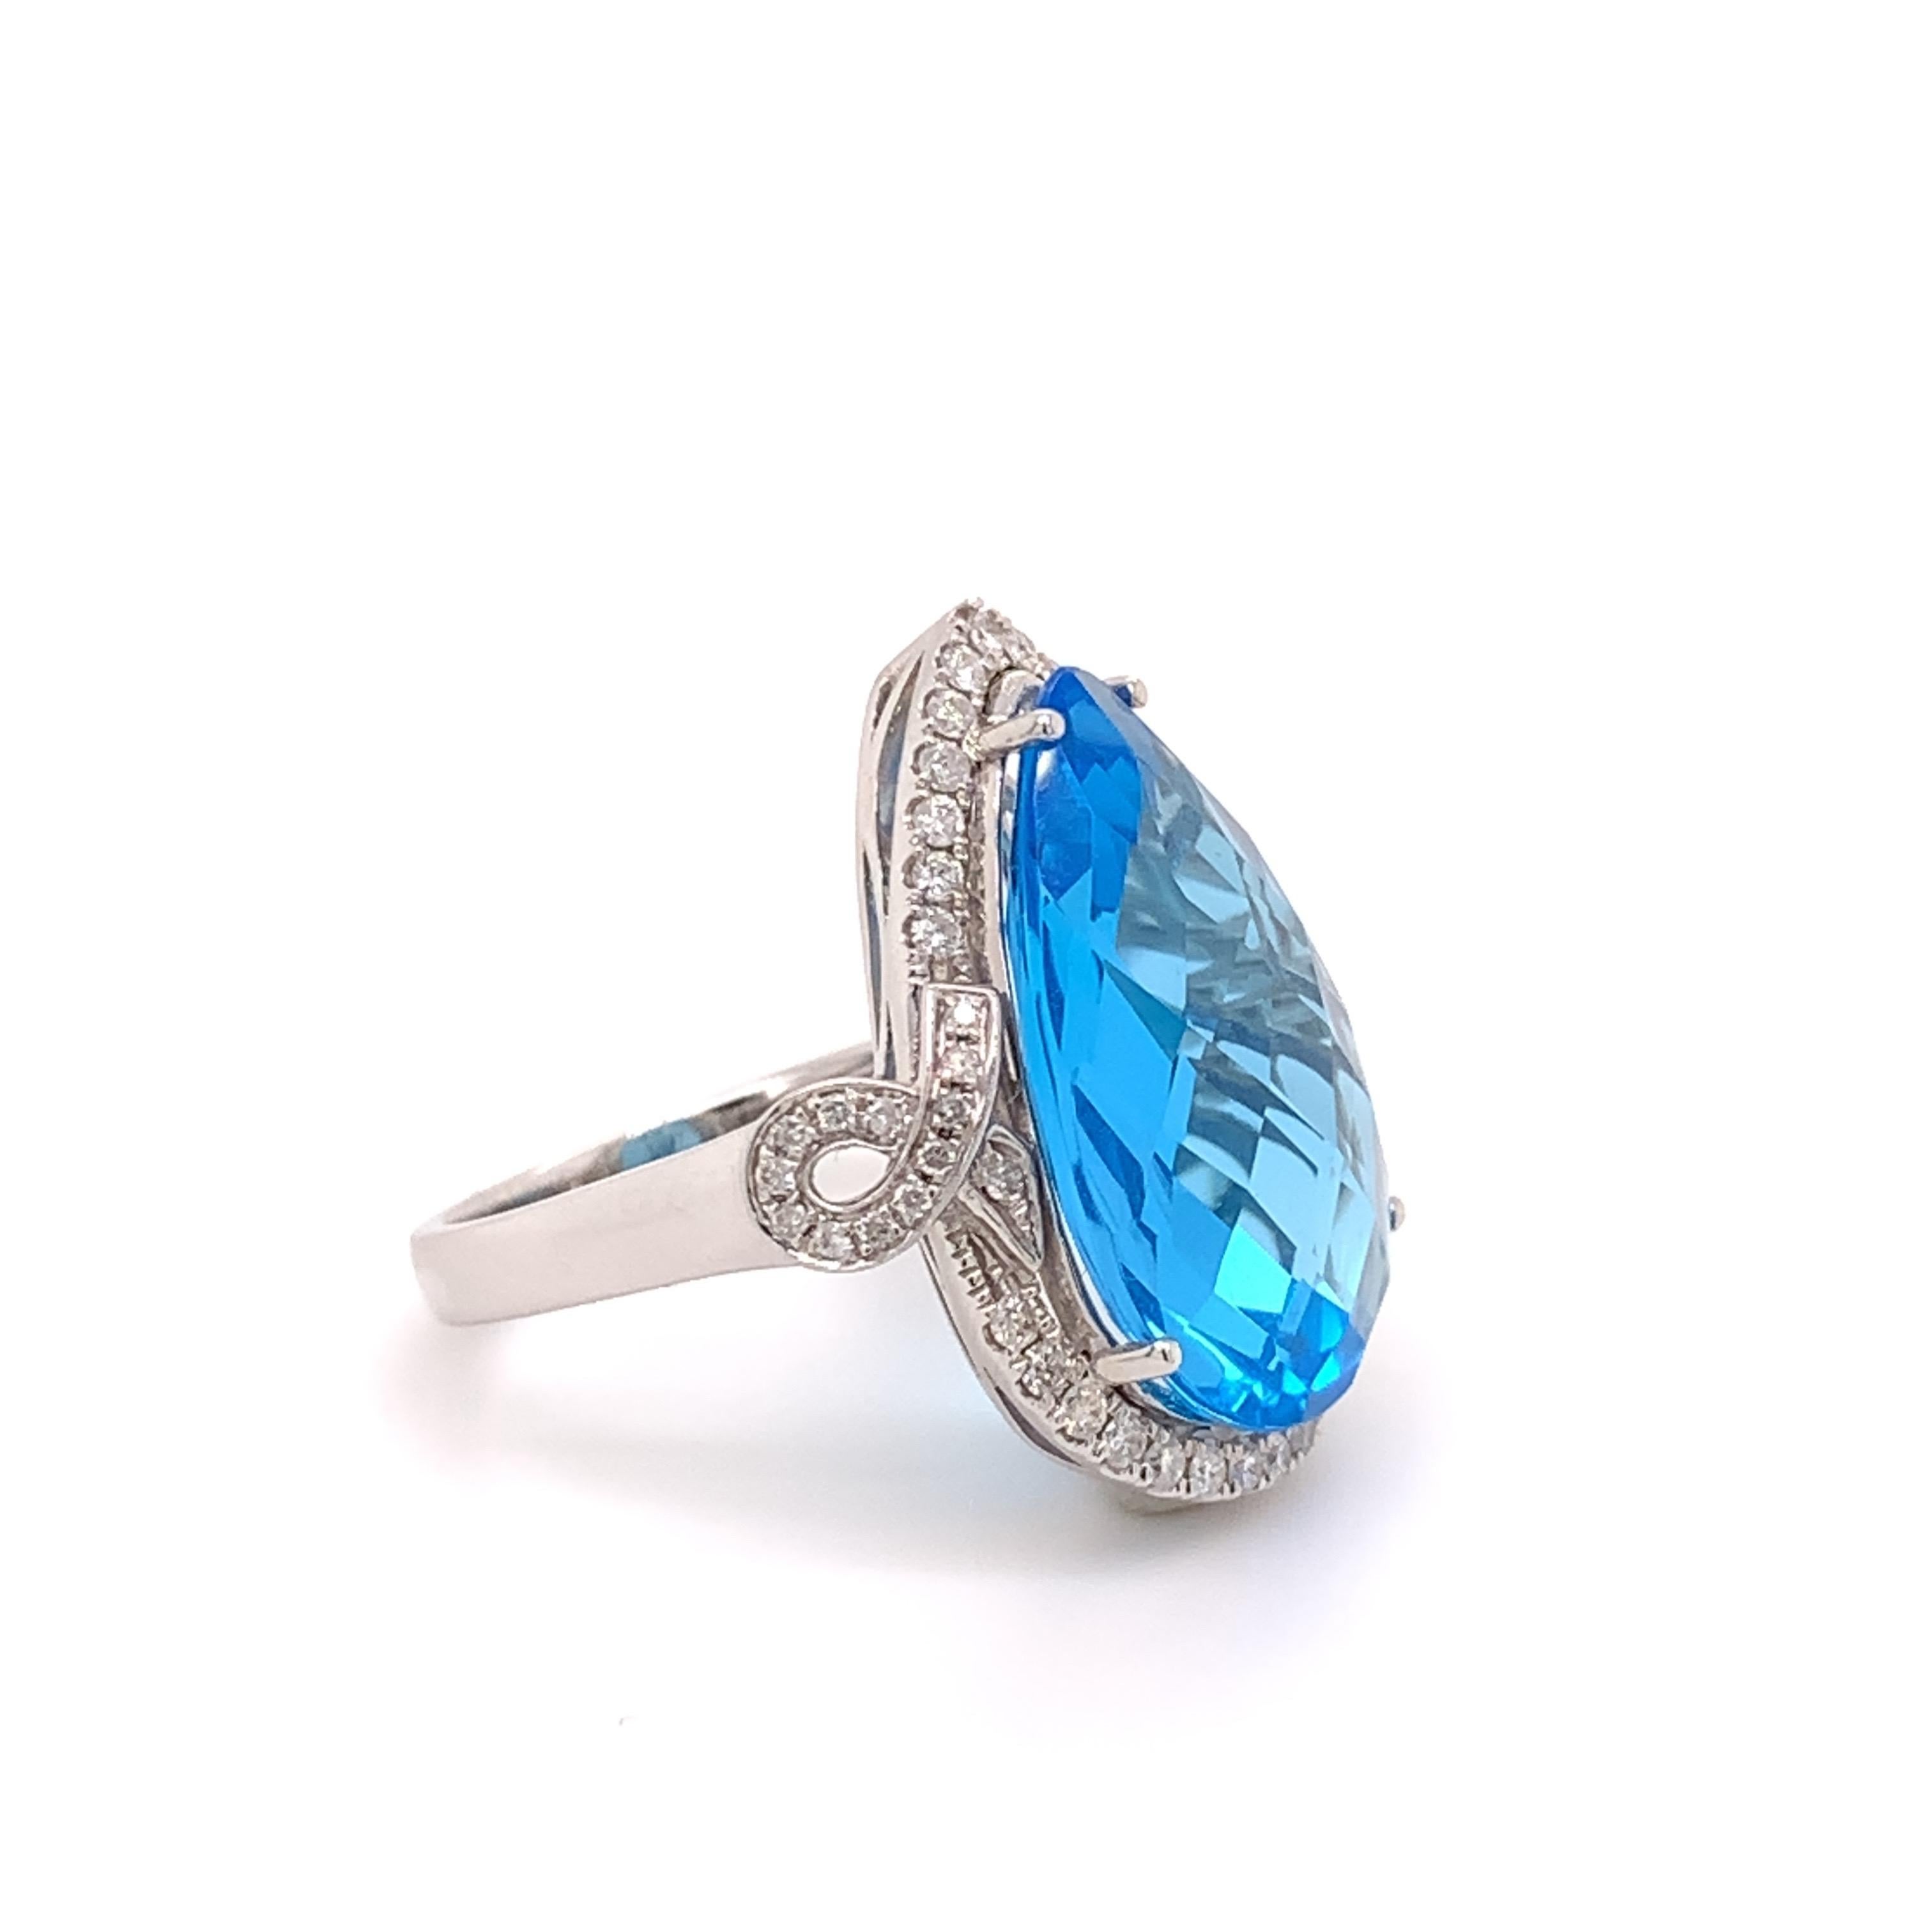 Glamorous topaz diamond cocktail ring. Lively sky blue, high brilliance with checkered-board cut, pear faceted 12.36 carats topaz mounted in high profile open basket, accented with round brilliant cut diamonds. Handcrafted design set in high